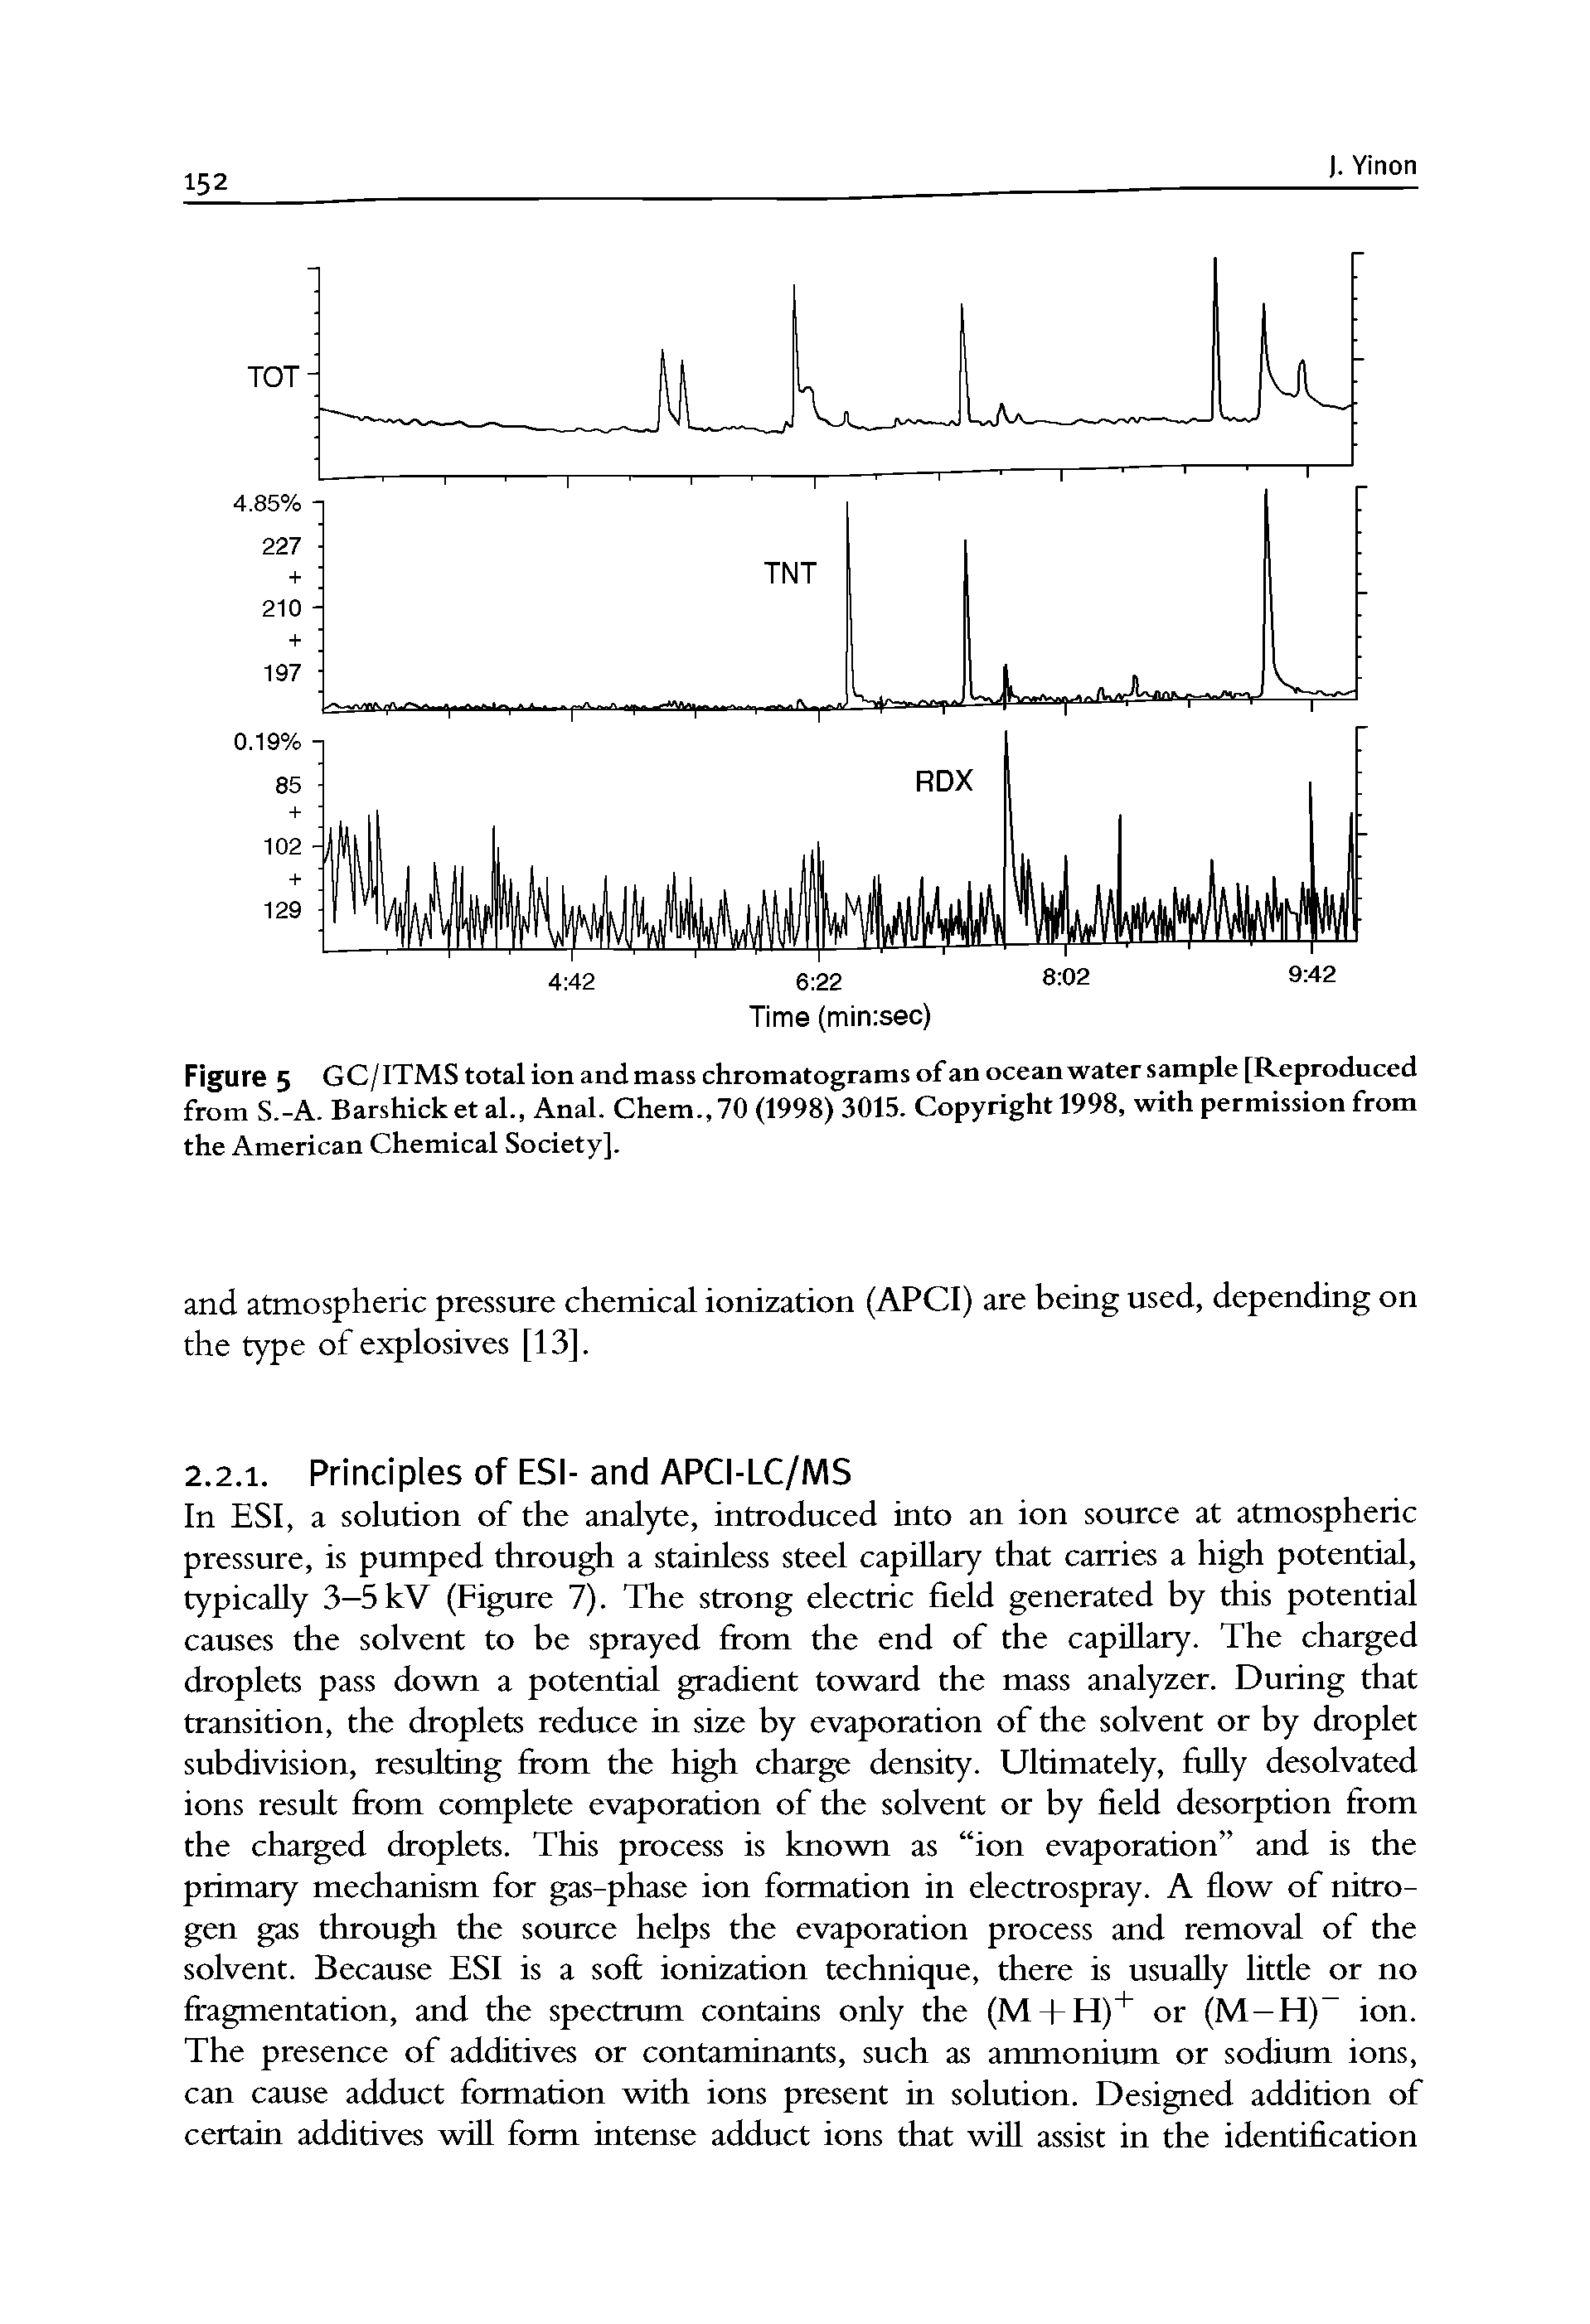 Figure 5 GC/ITMS total ion and mass chromatograms of an ocean water sample [Reproduced from S.-A. Barshicket al., Anal. Chem.,70 (1998) 3015. Copyright 1998, with permission from the American Chemical Society].